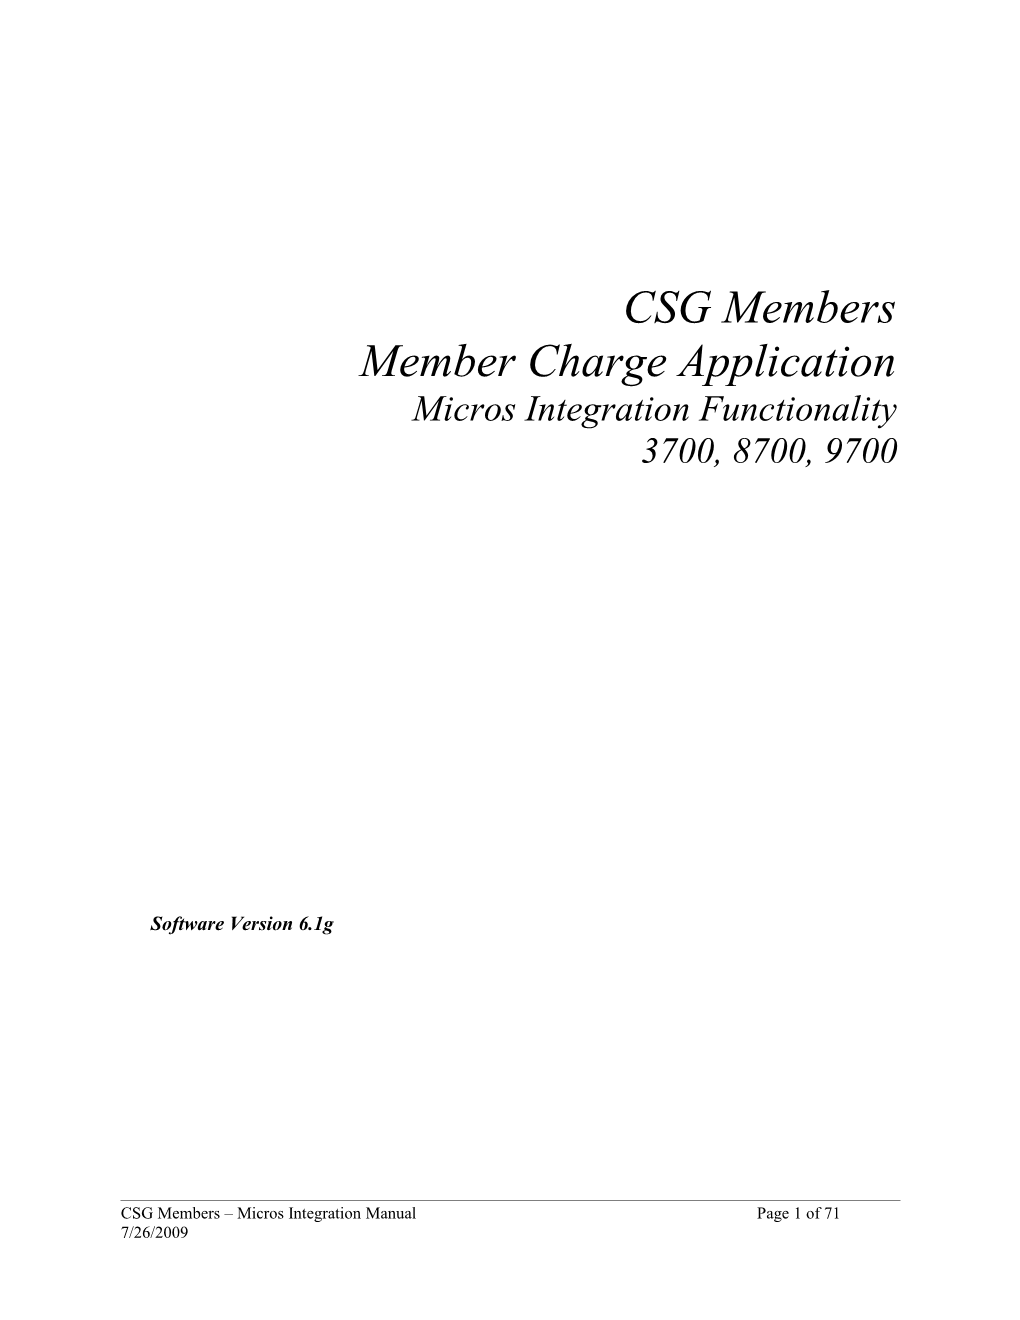 Member Charge Application